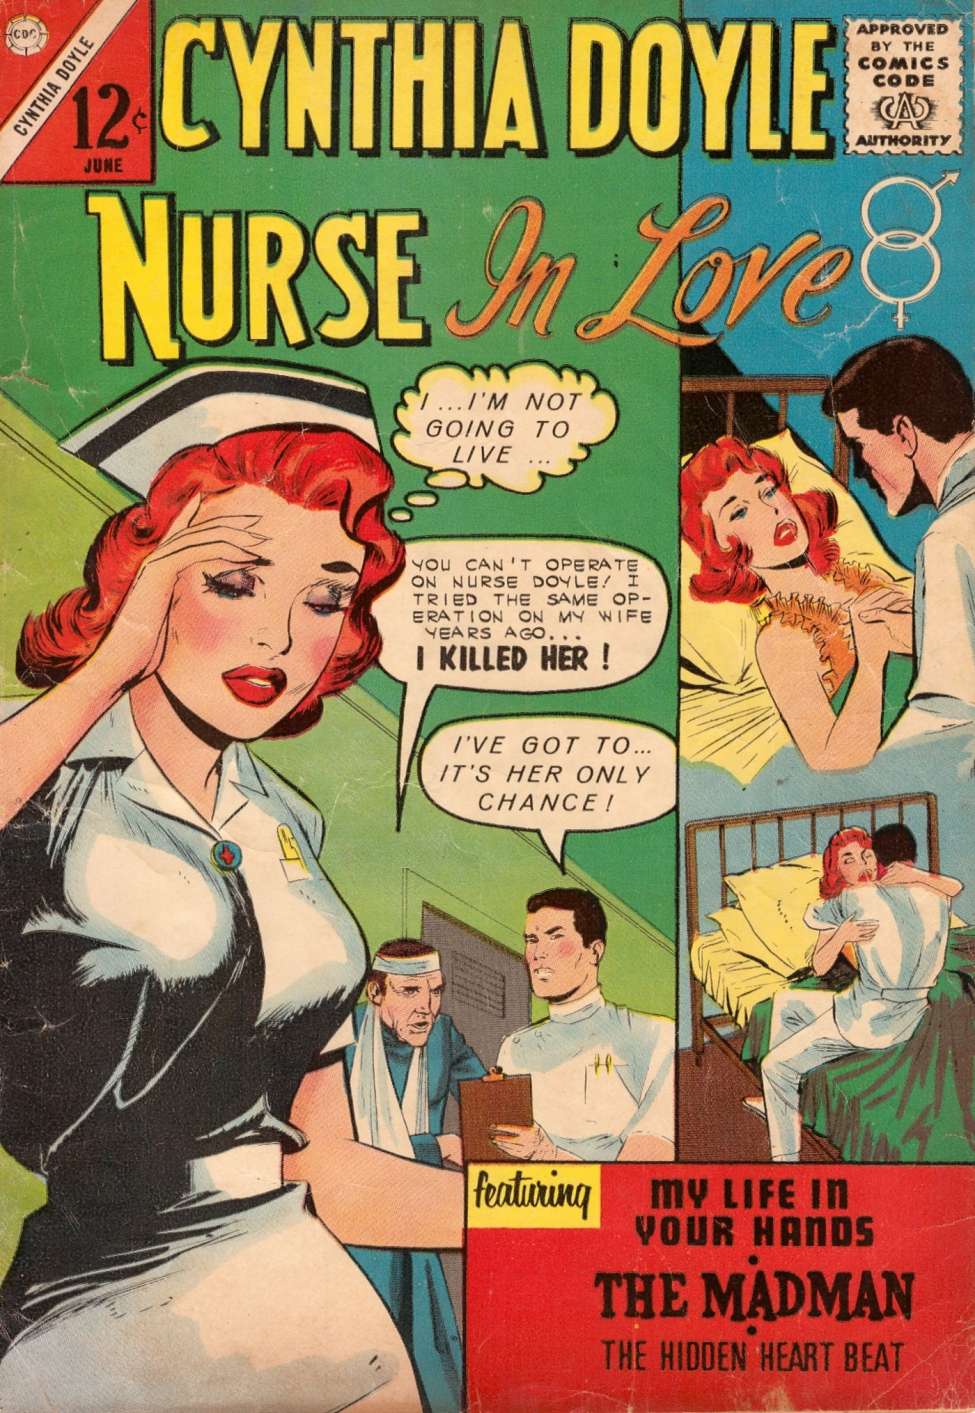 Book Cover For Cynthia Doyle, Nurse in Love 70